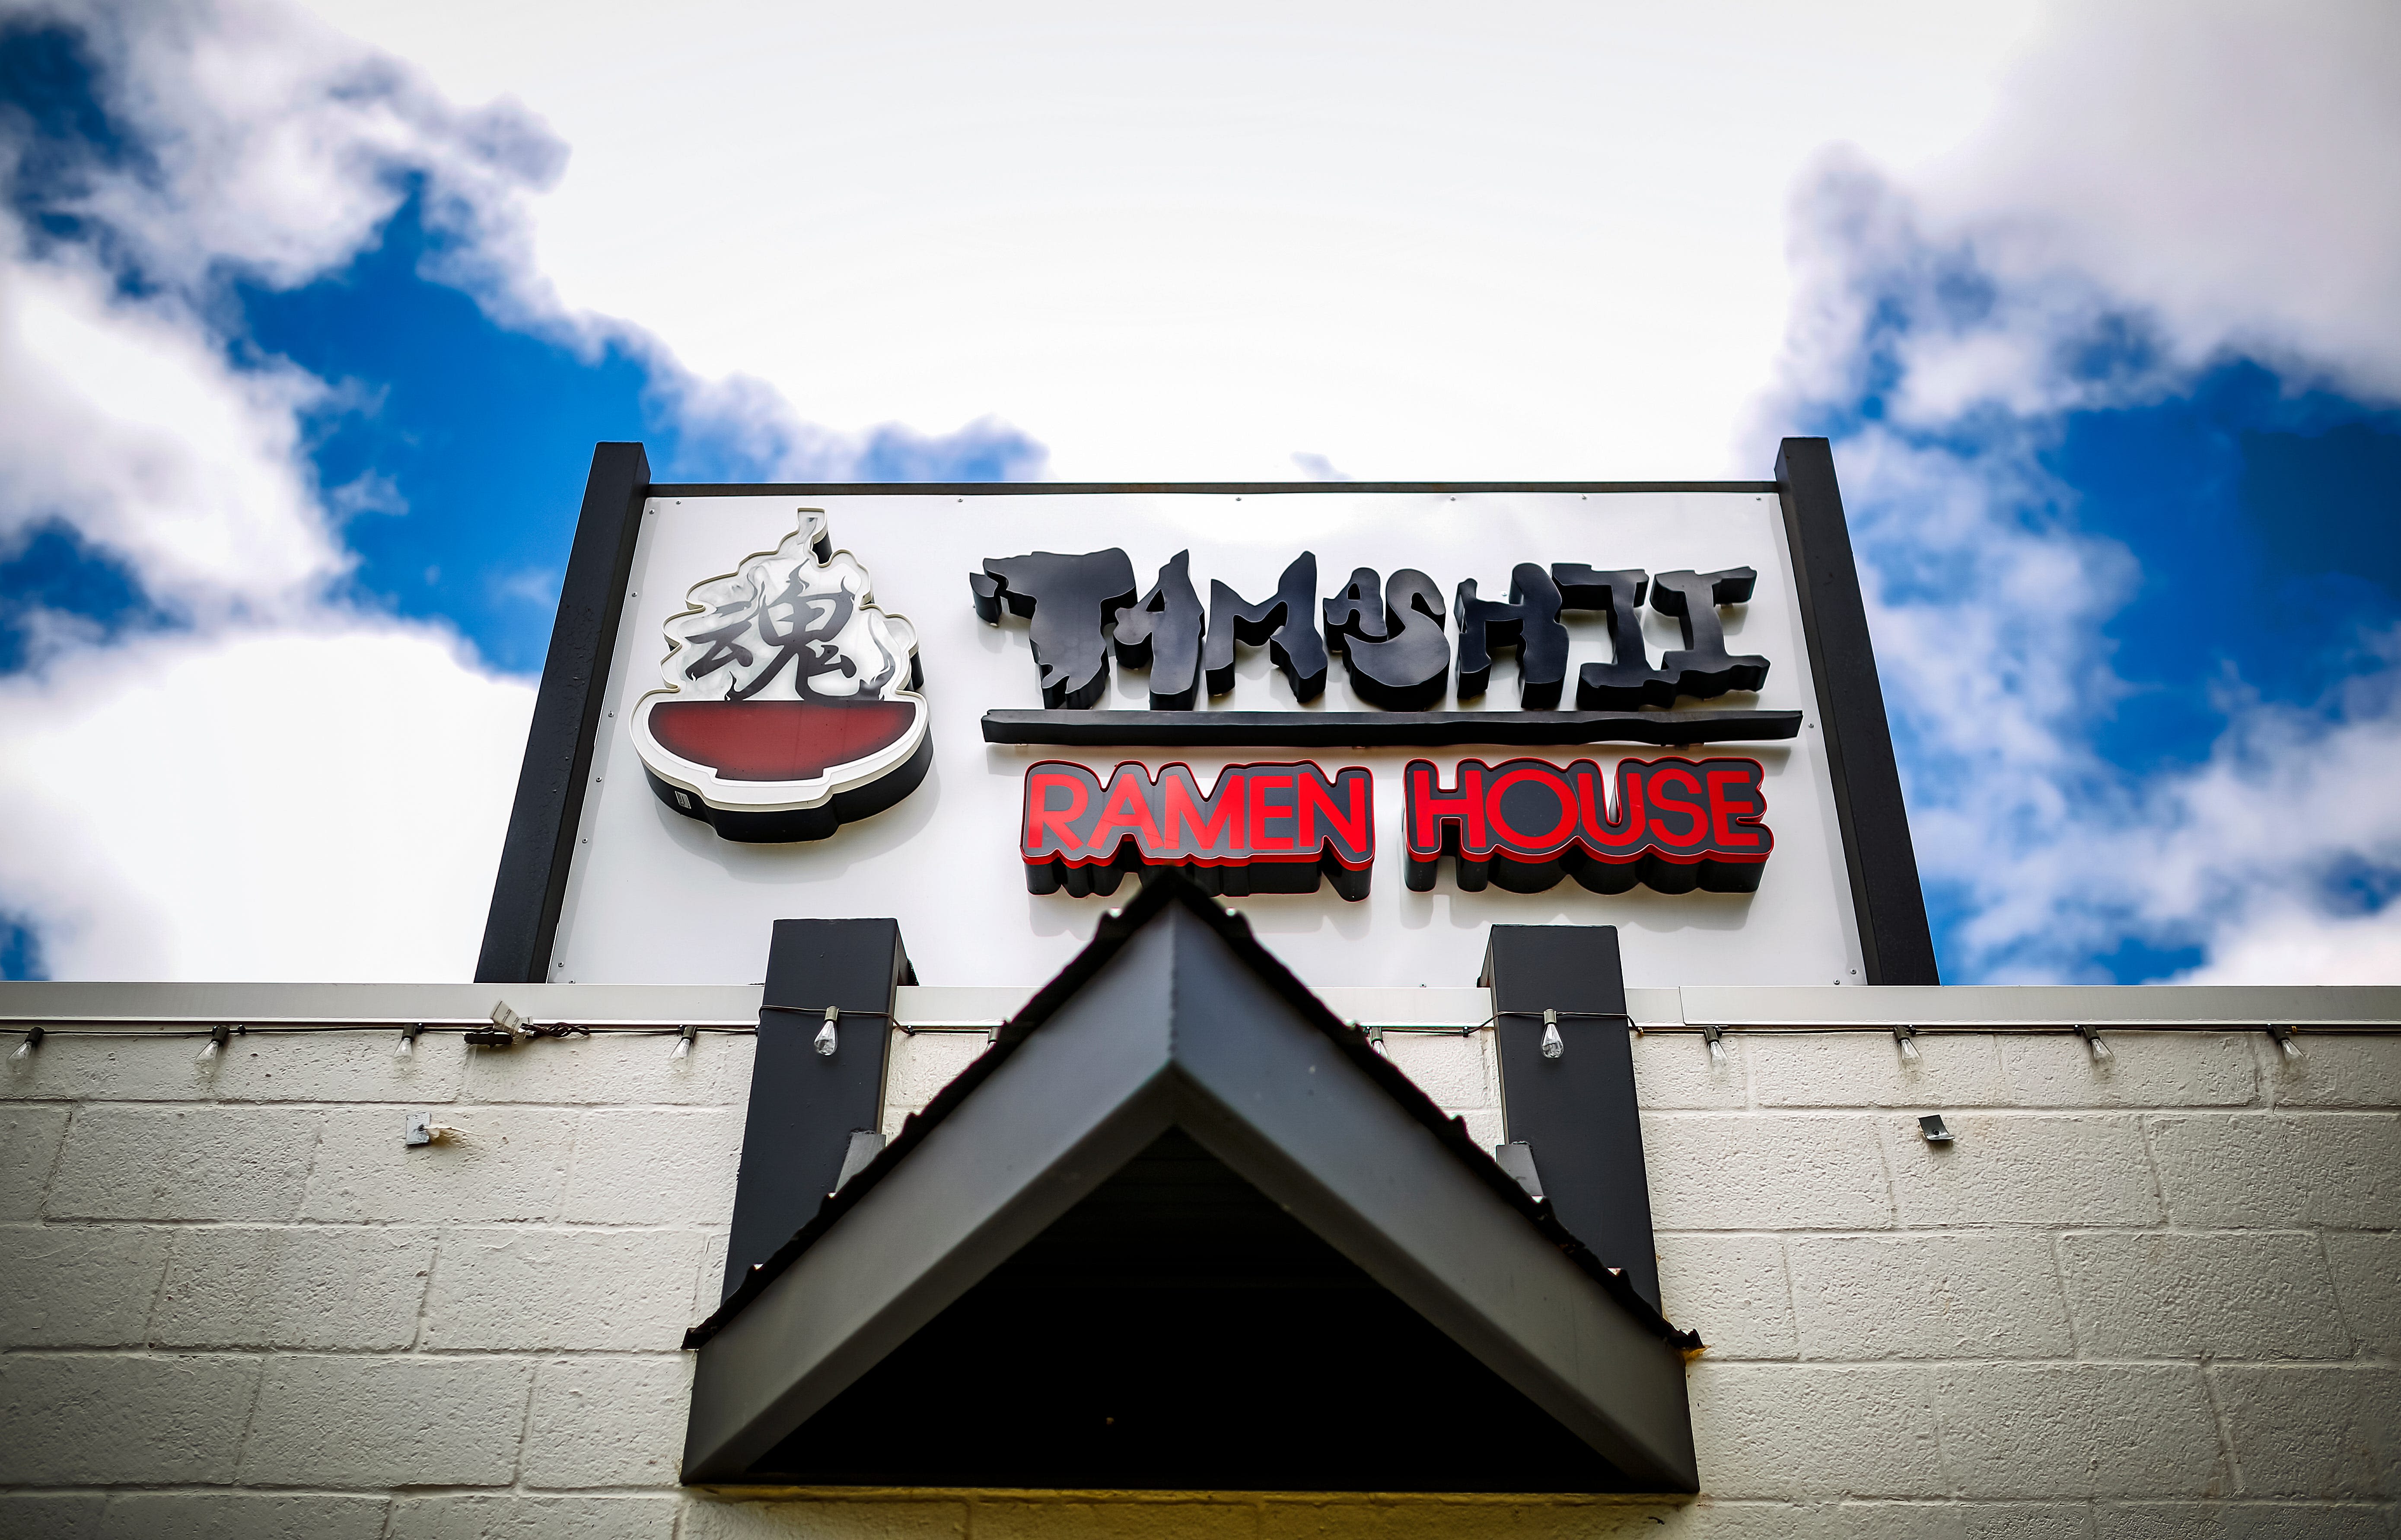 A ramen shop from Japan is taking over Tamashii in Edmond this week. What we know